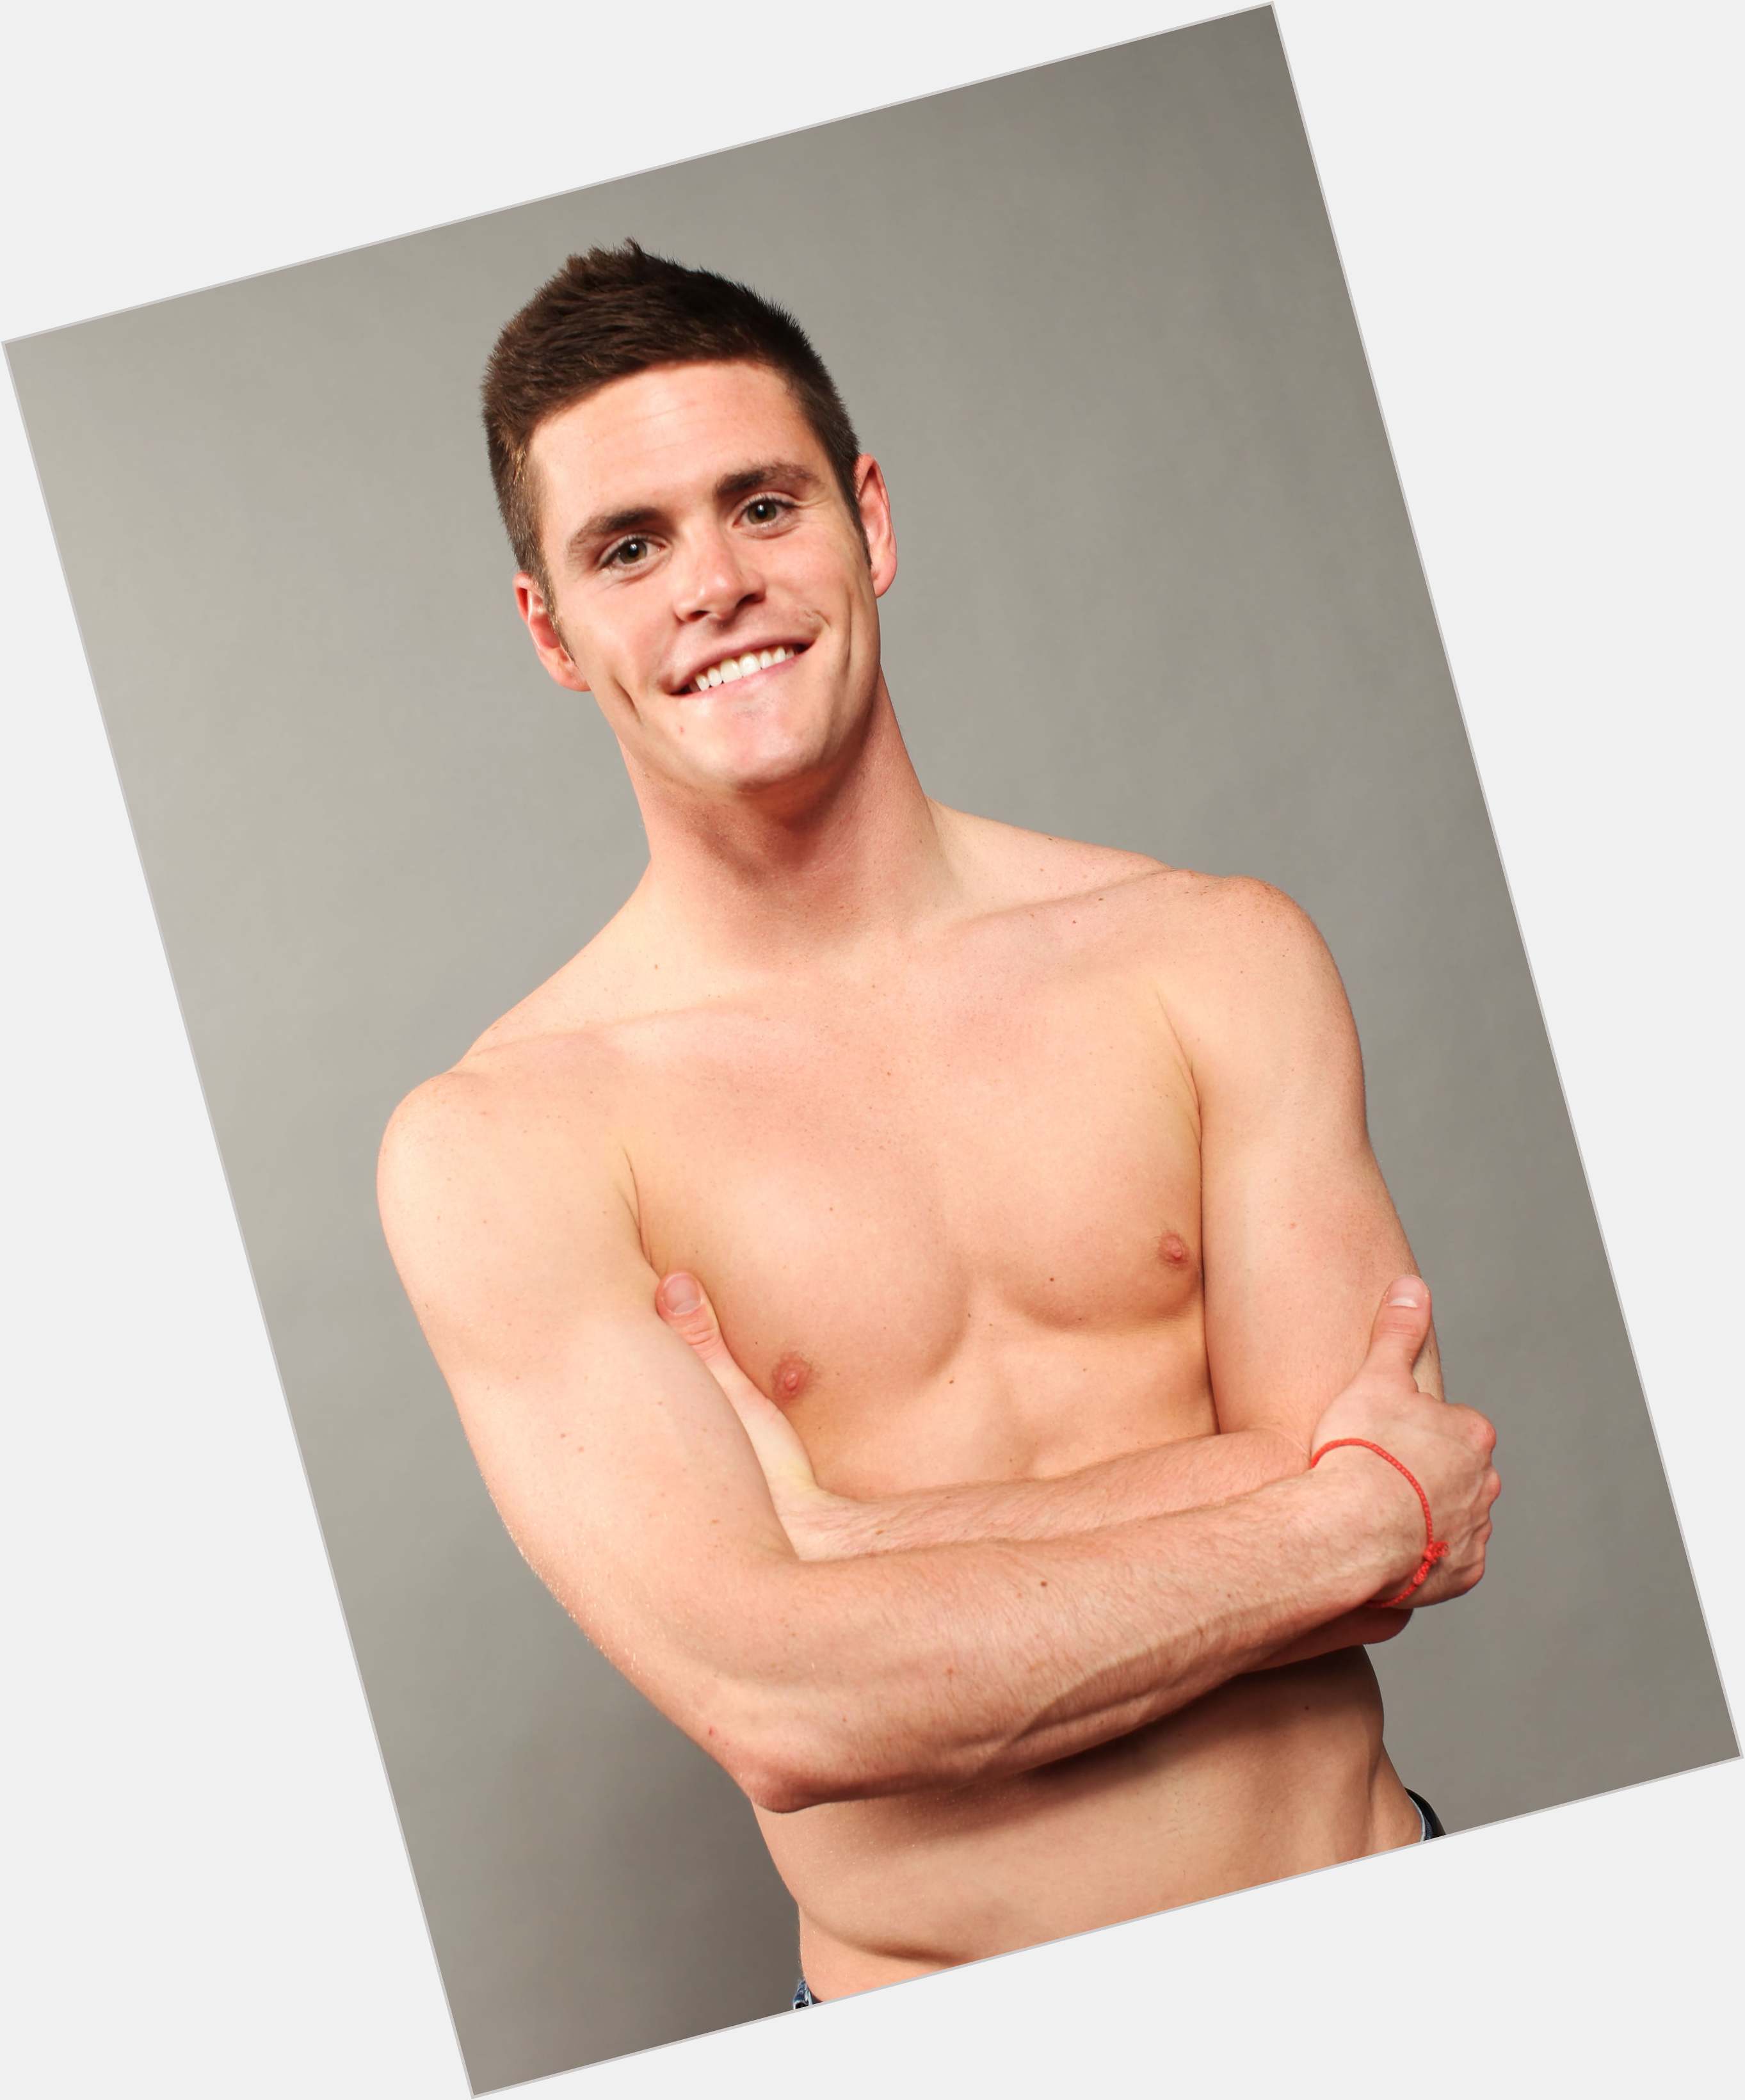 <a href="/hot-men/david-boudia/is-he-married-straight-homosexual-engaged-mormon-single">David Boudia</a> Athletic body,  dark brown hair & hairstyles